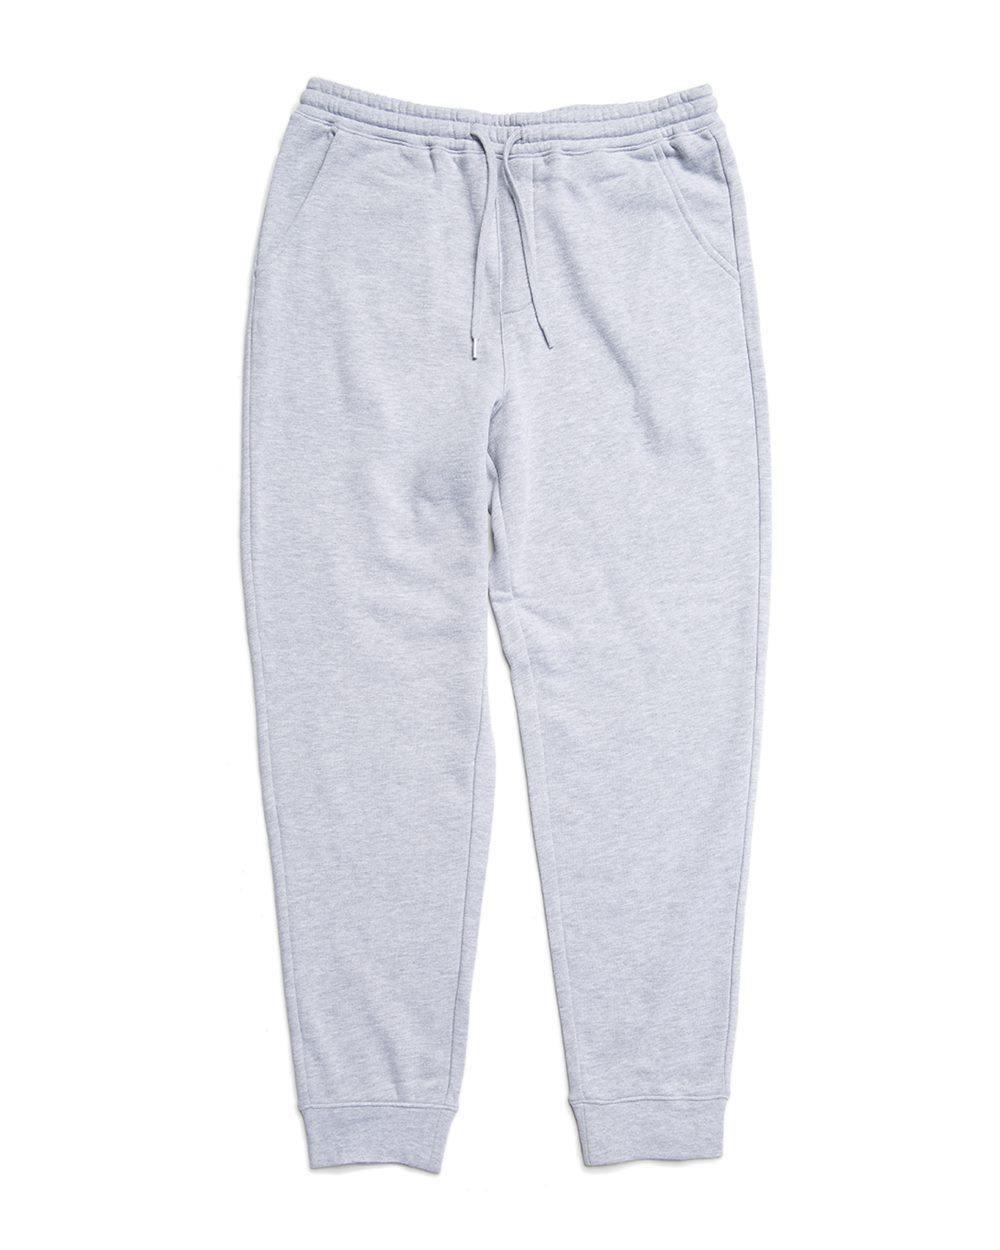 Midweight Fleece Joggers - Constantly Create Shop